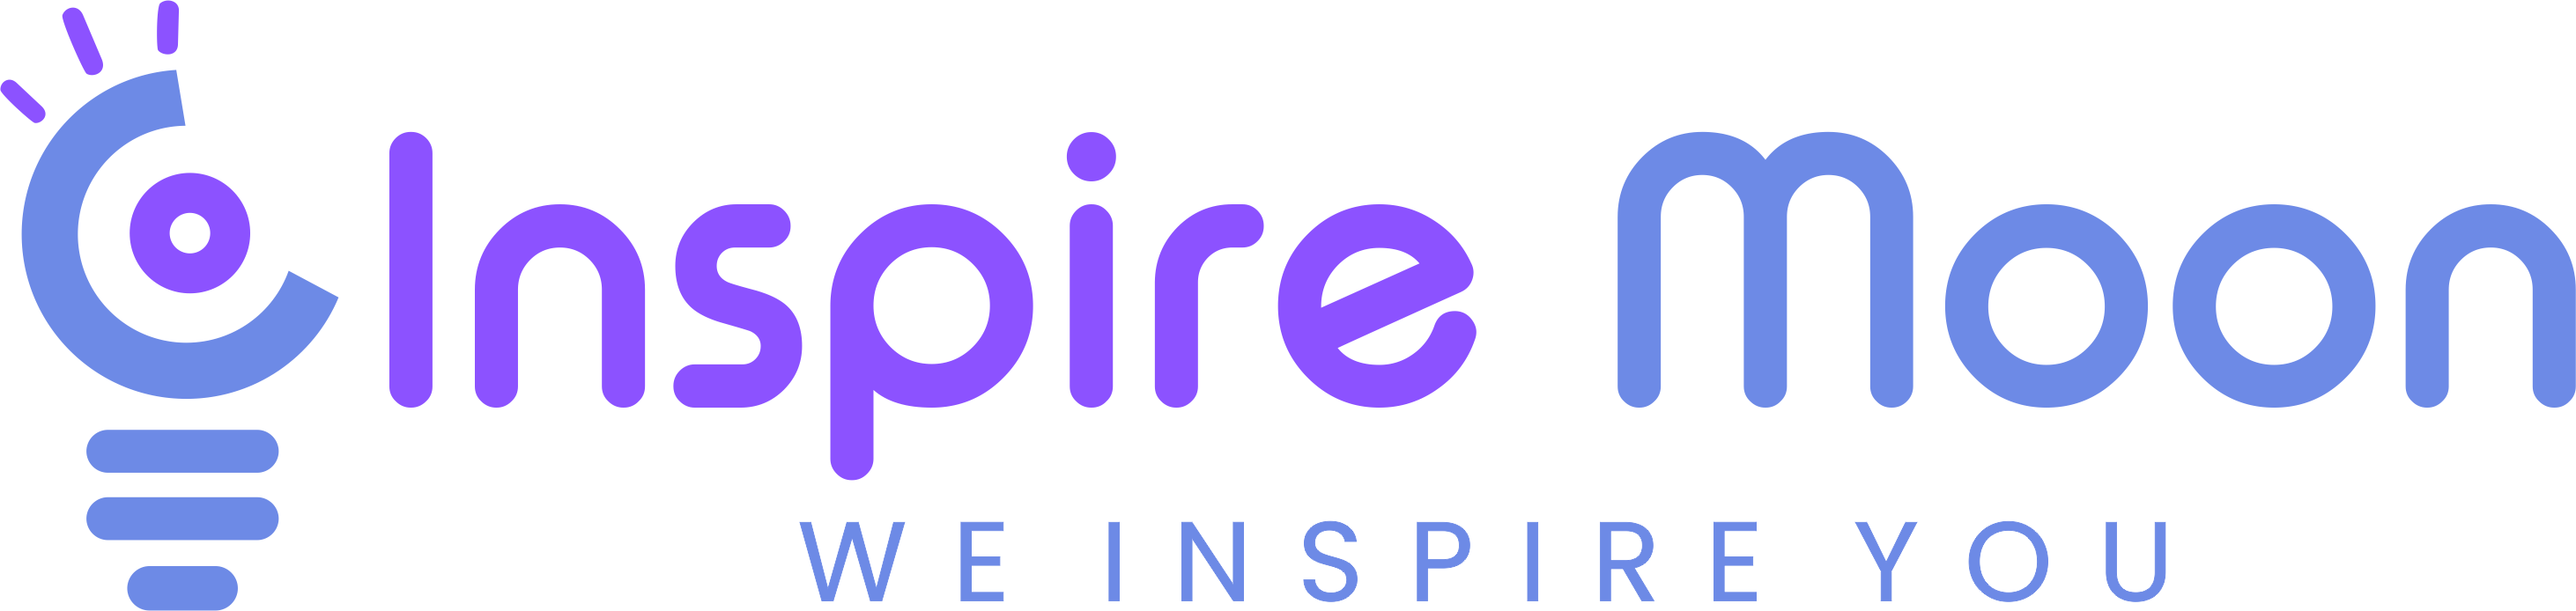 We inspire you